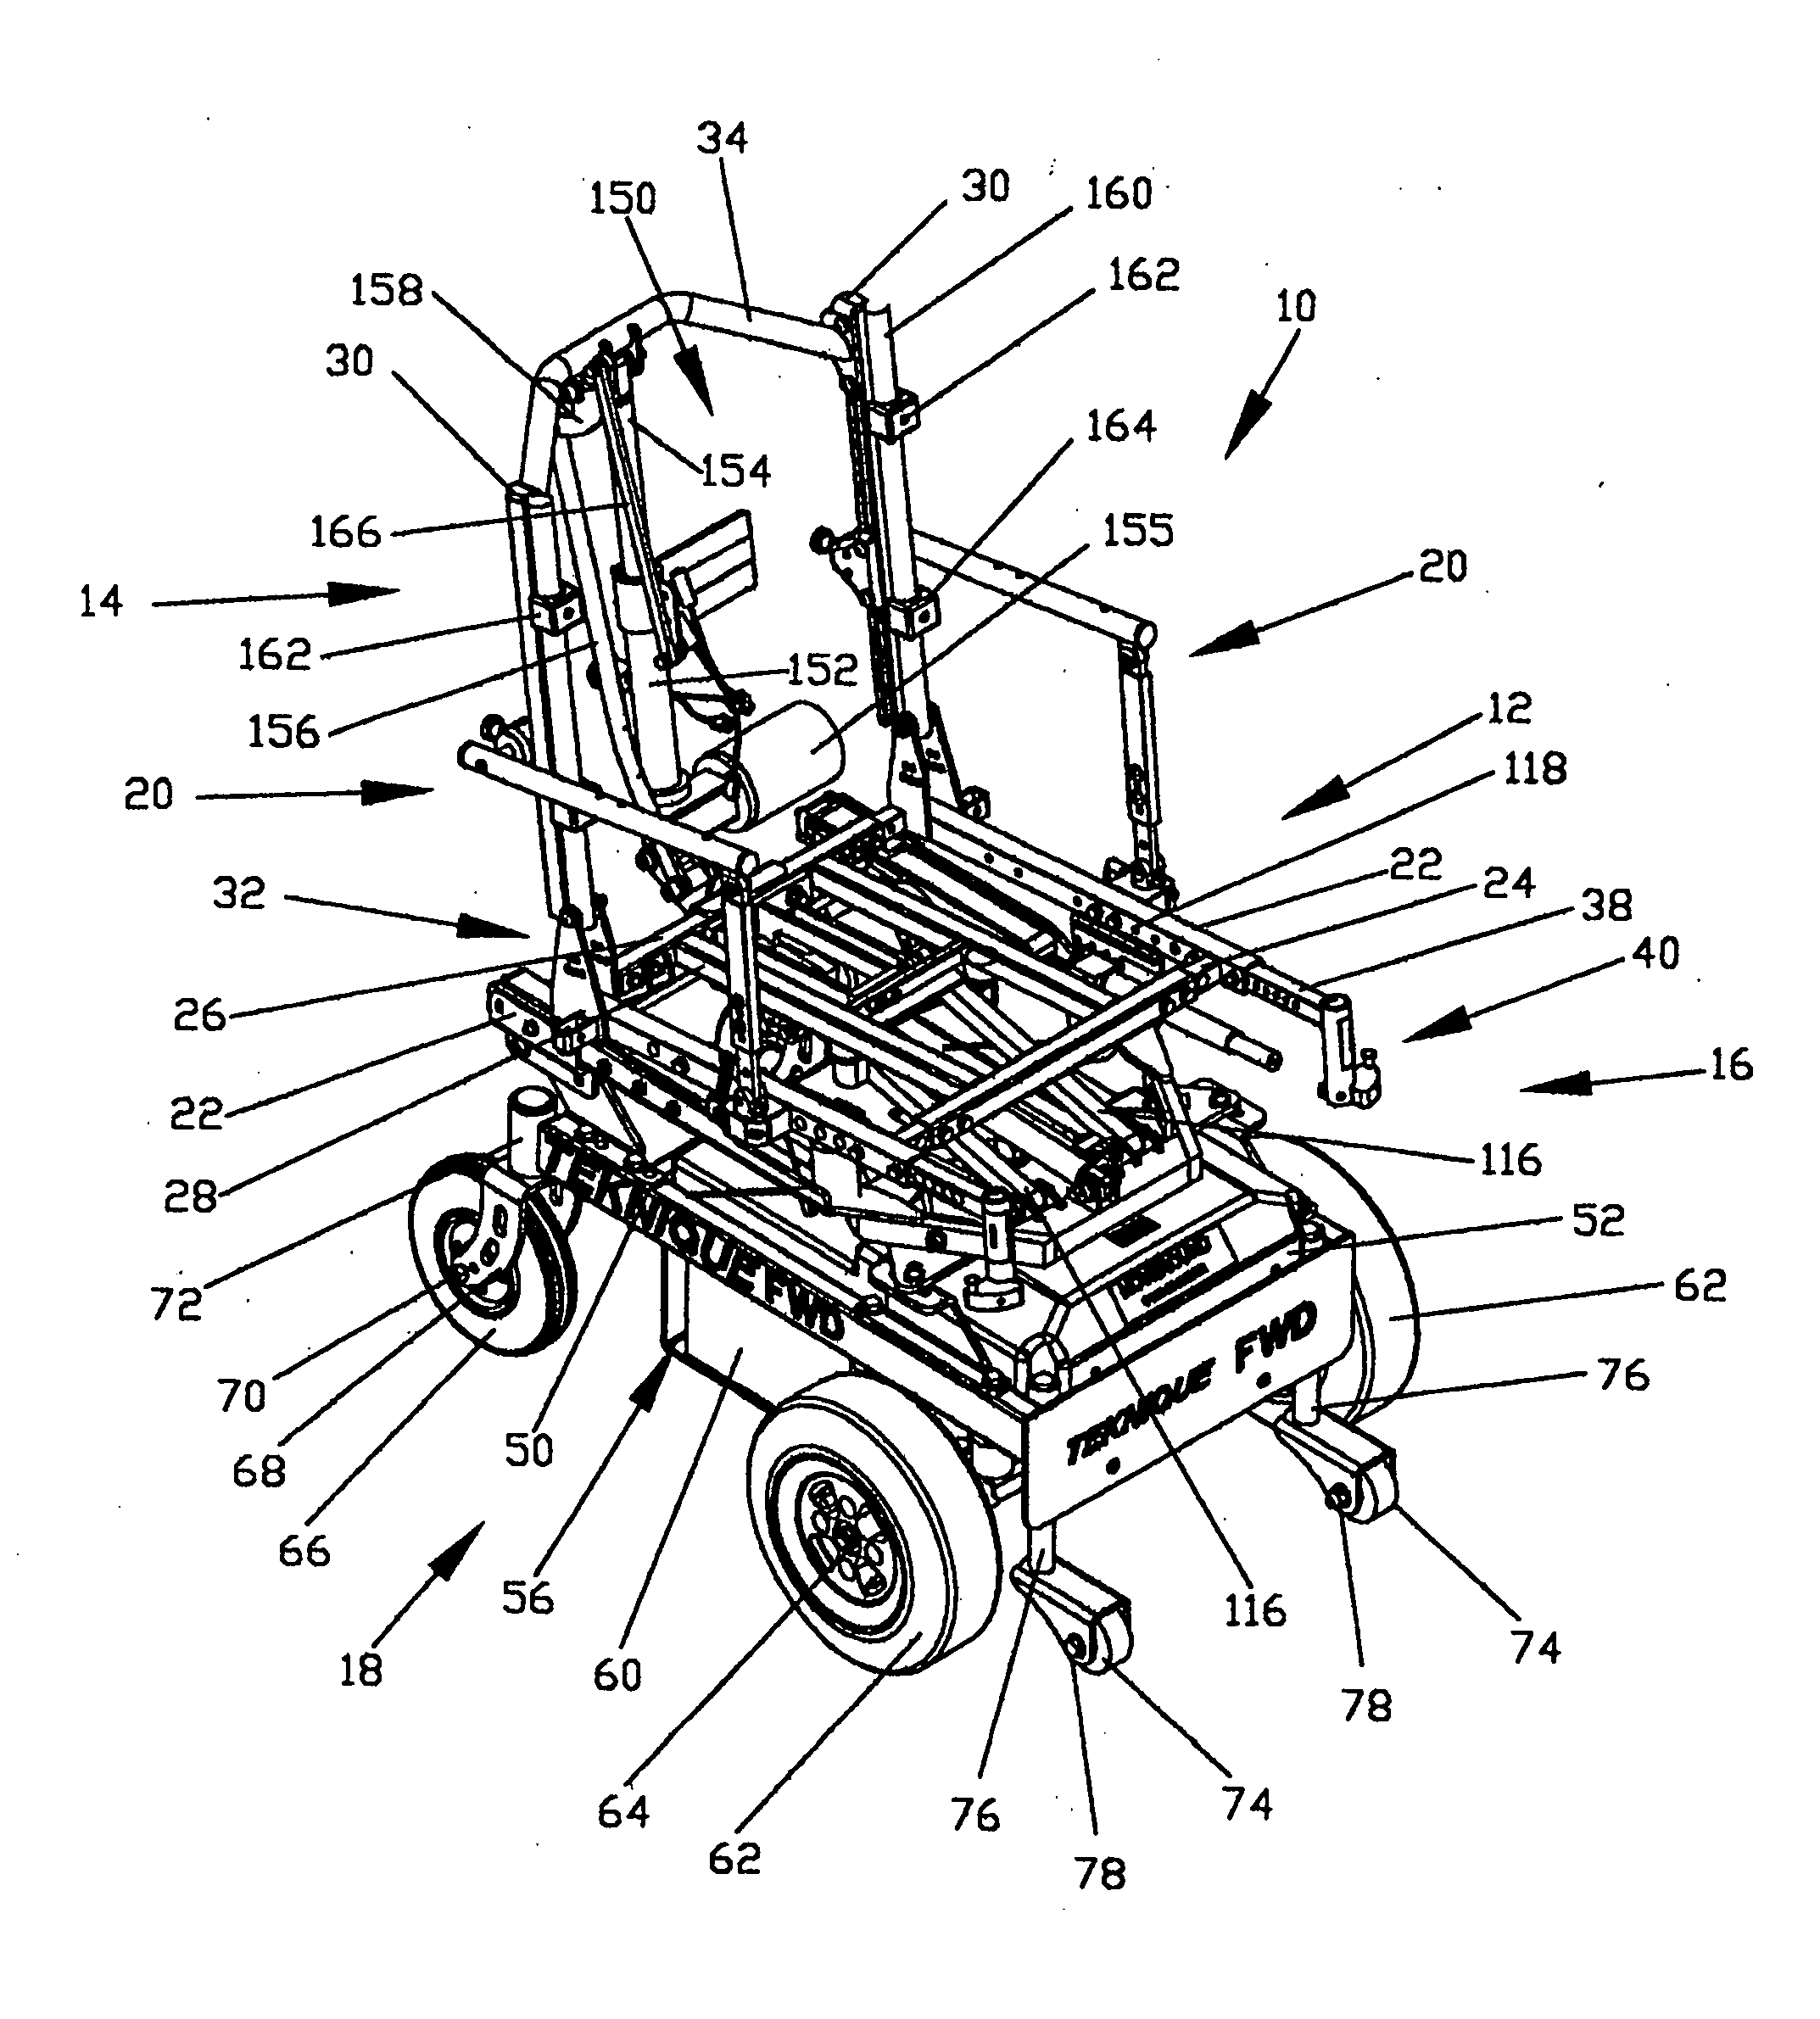 Seat positioning and control system